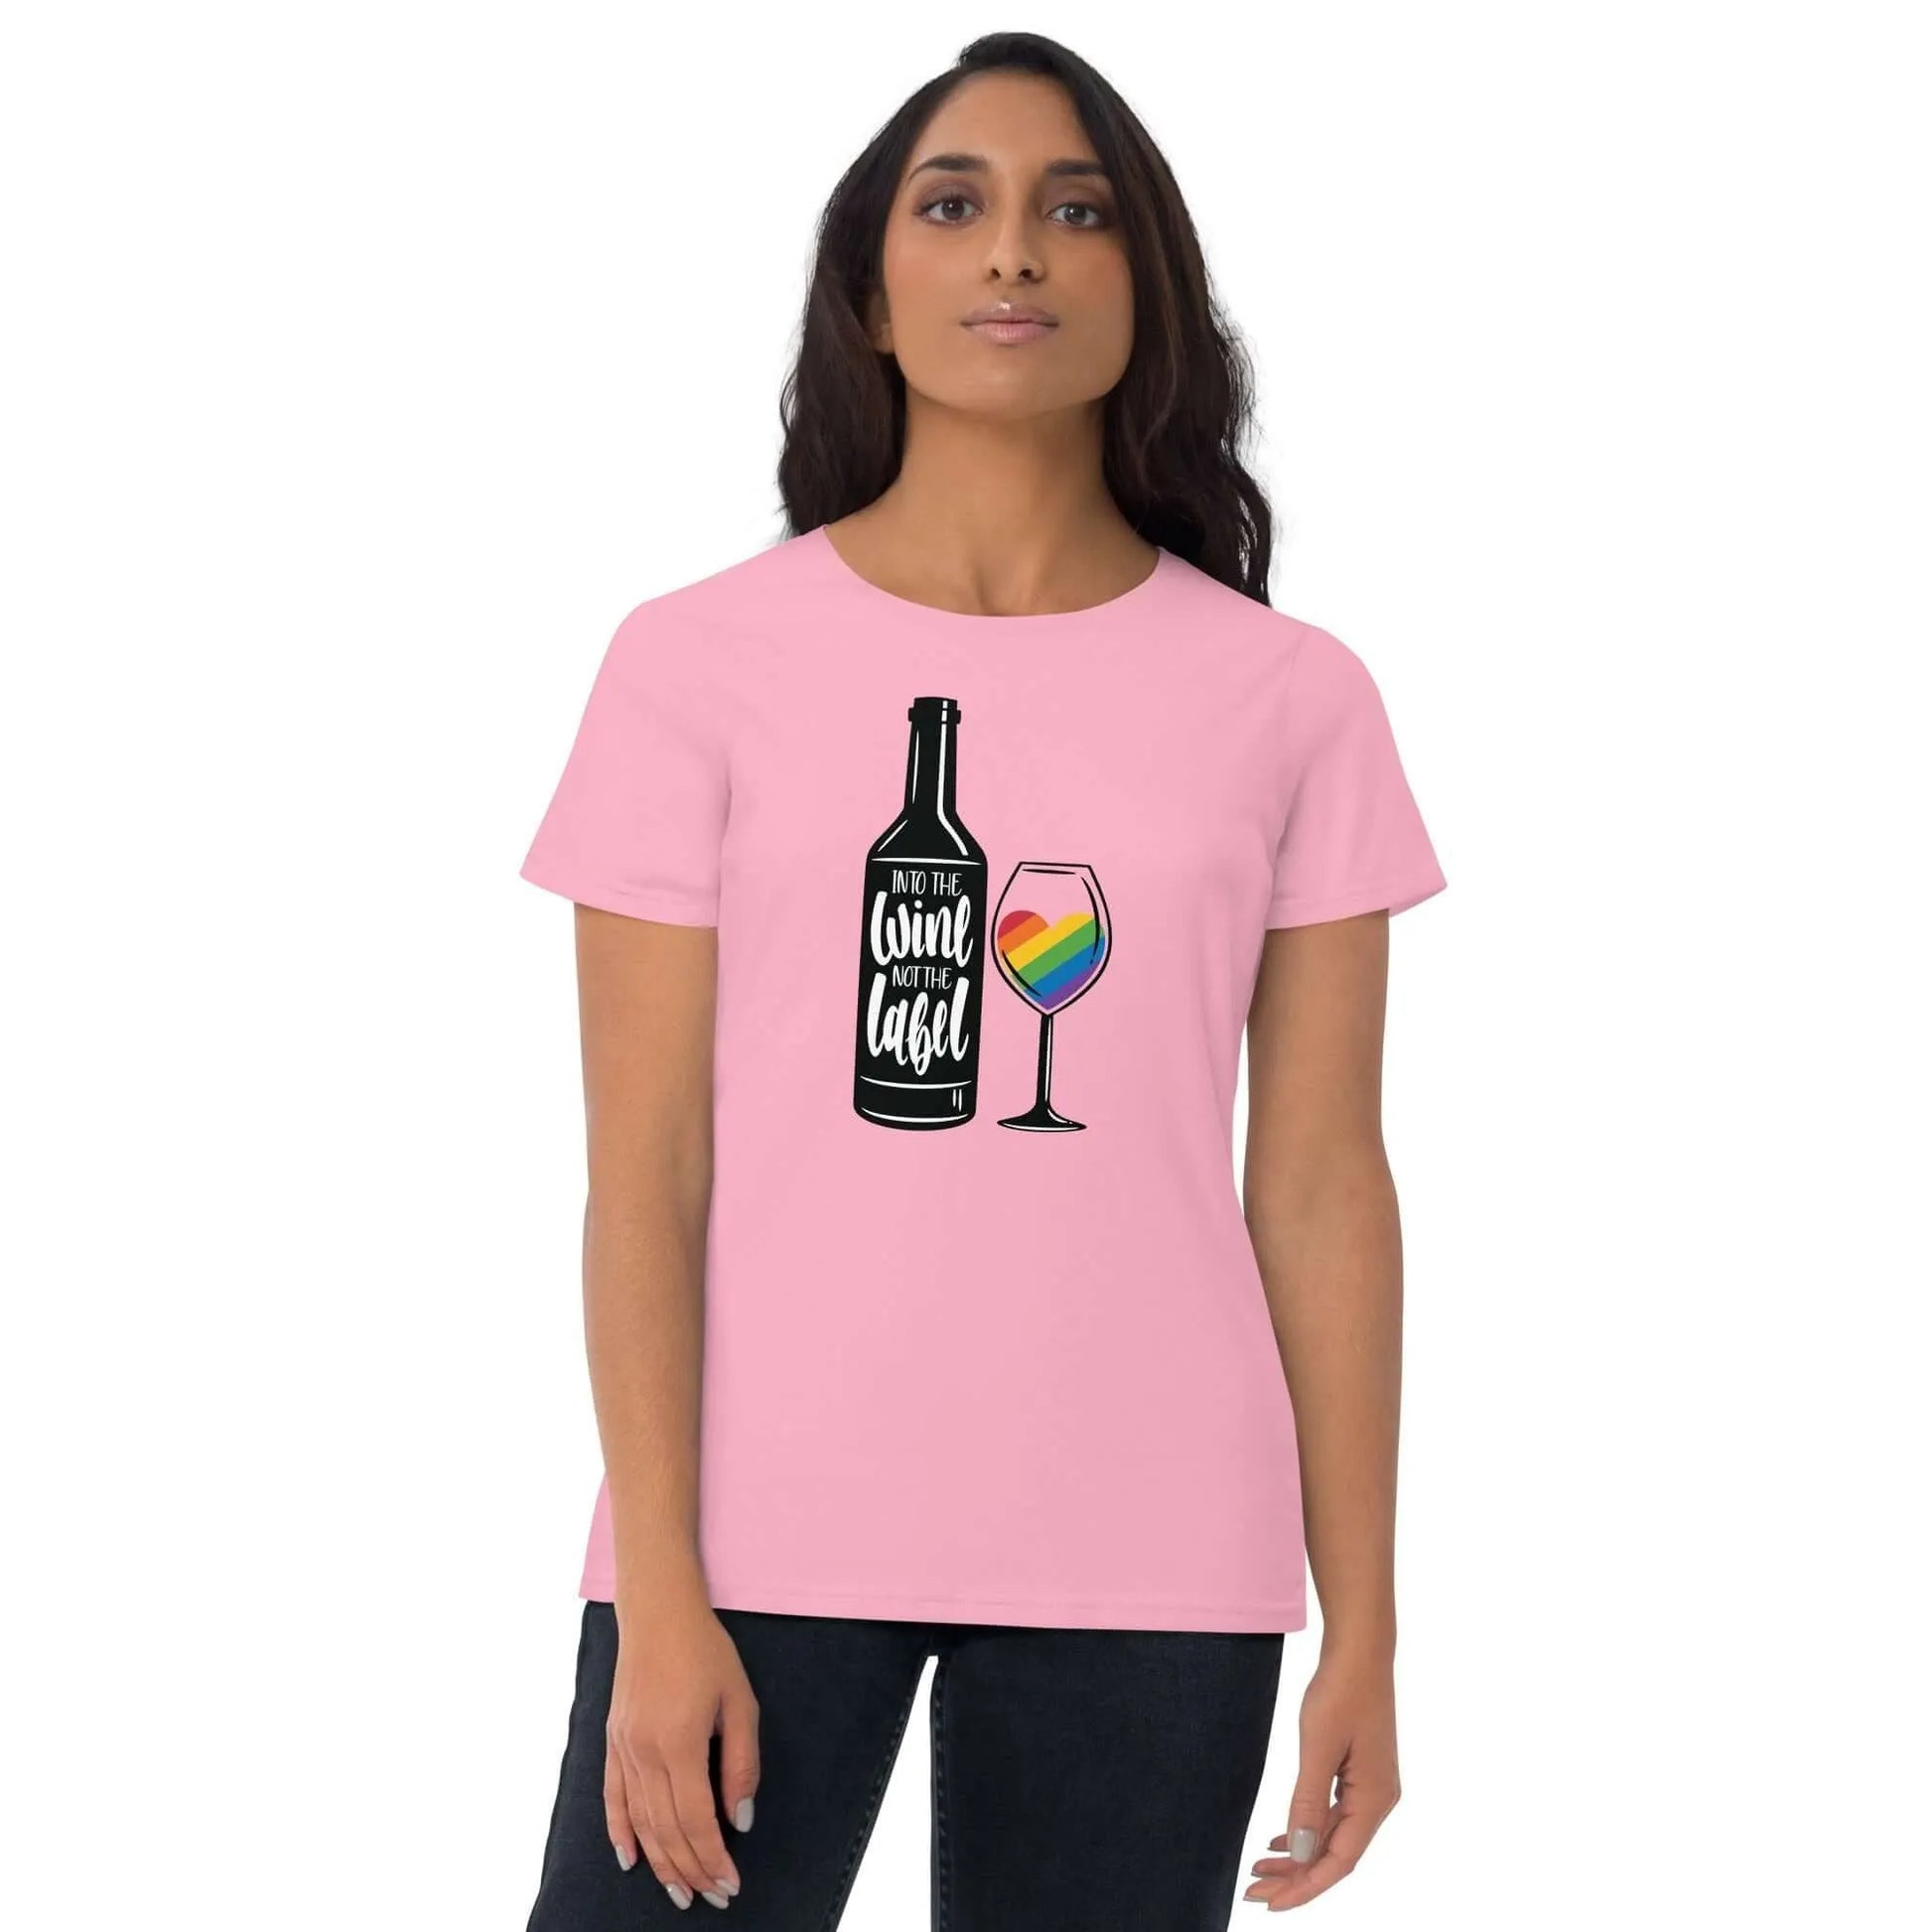 Into The Wine Not The Label Women’s T-Shirt